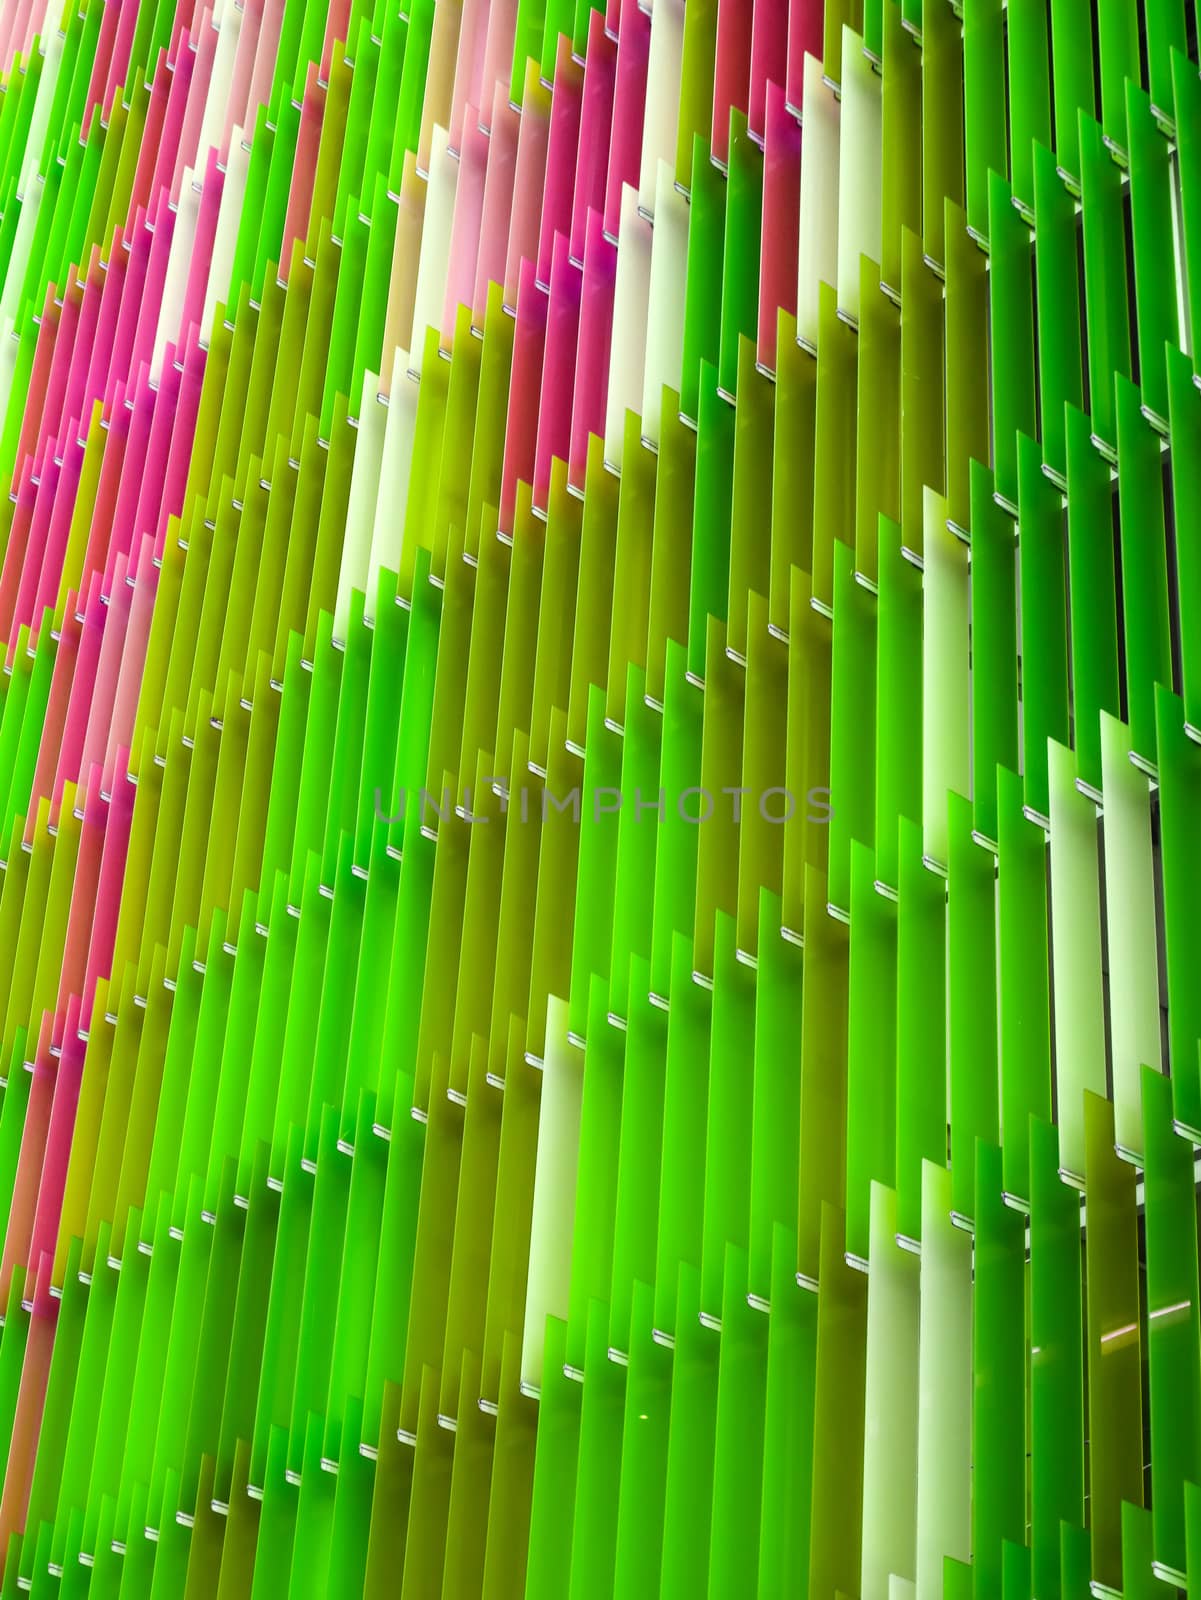 acrylic plastic sheet interior vertical, color moss green apple colorful pattern of concept design